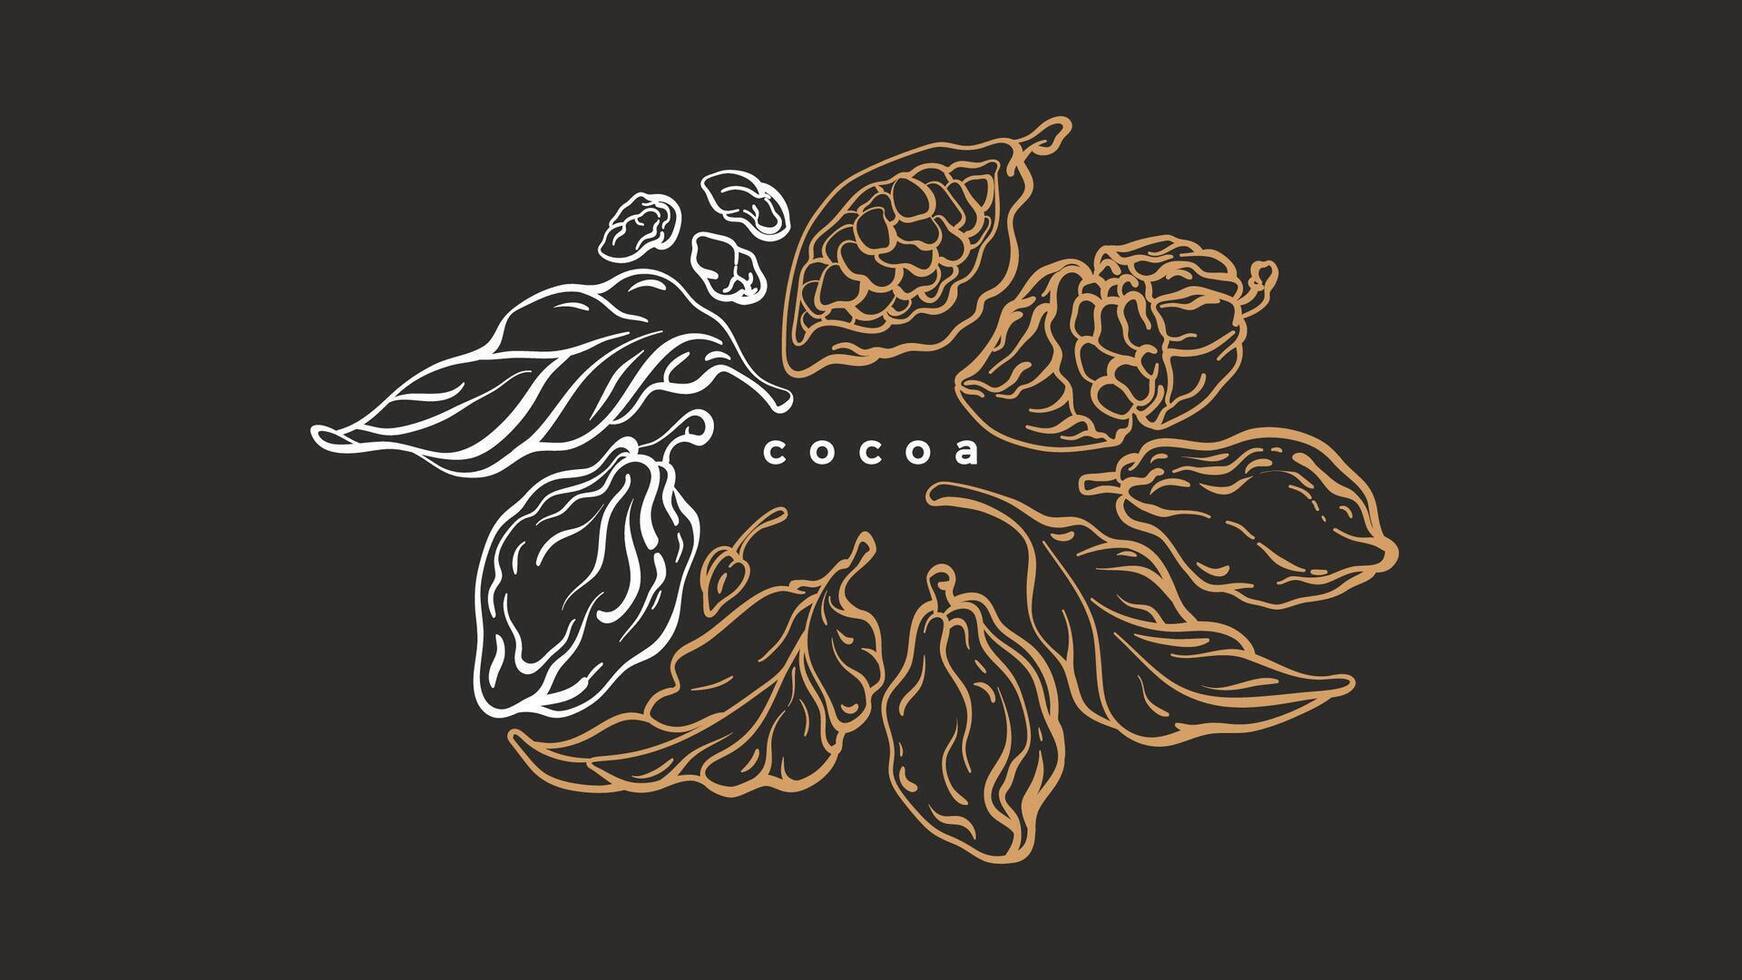 Cocoa circle symbol. Vector graphic tree, branch, leaf, bean, fruit. Vintage hand drawn tropical card, nature wreath. Food illustration. Organic natural chocolate